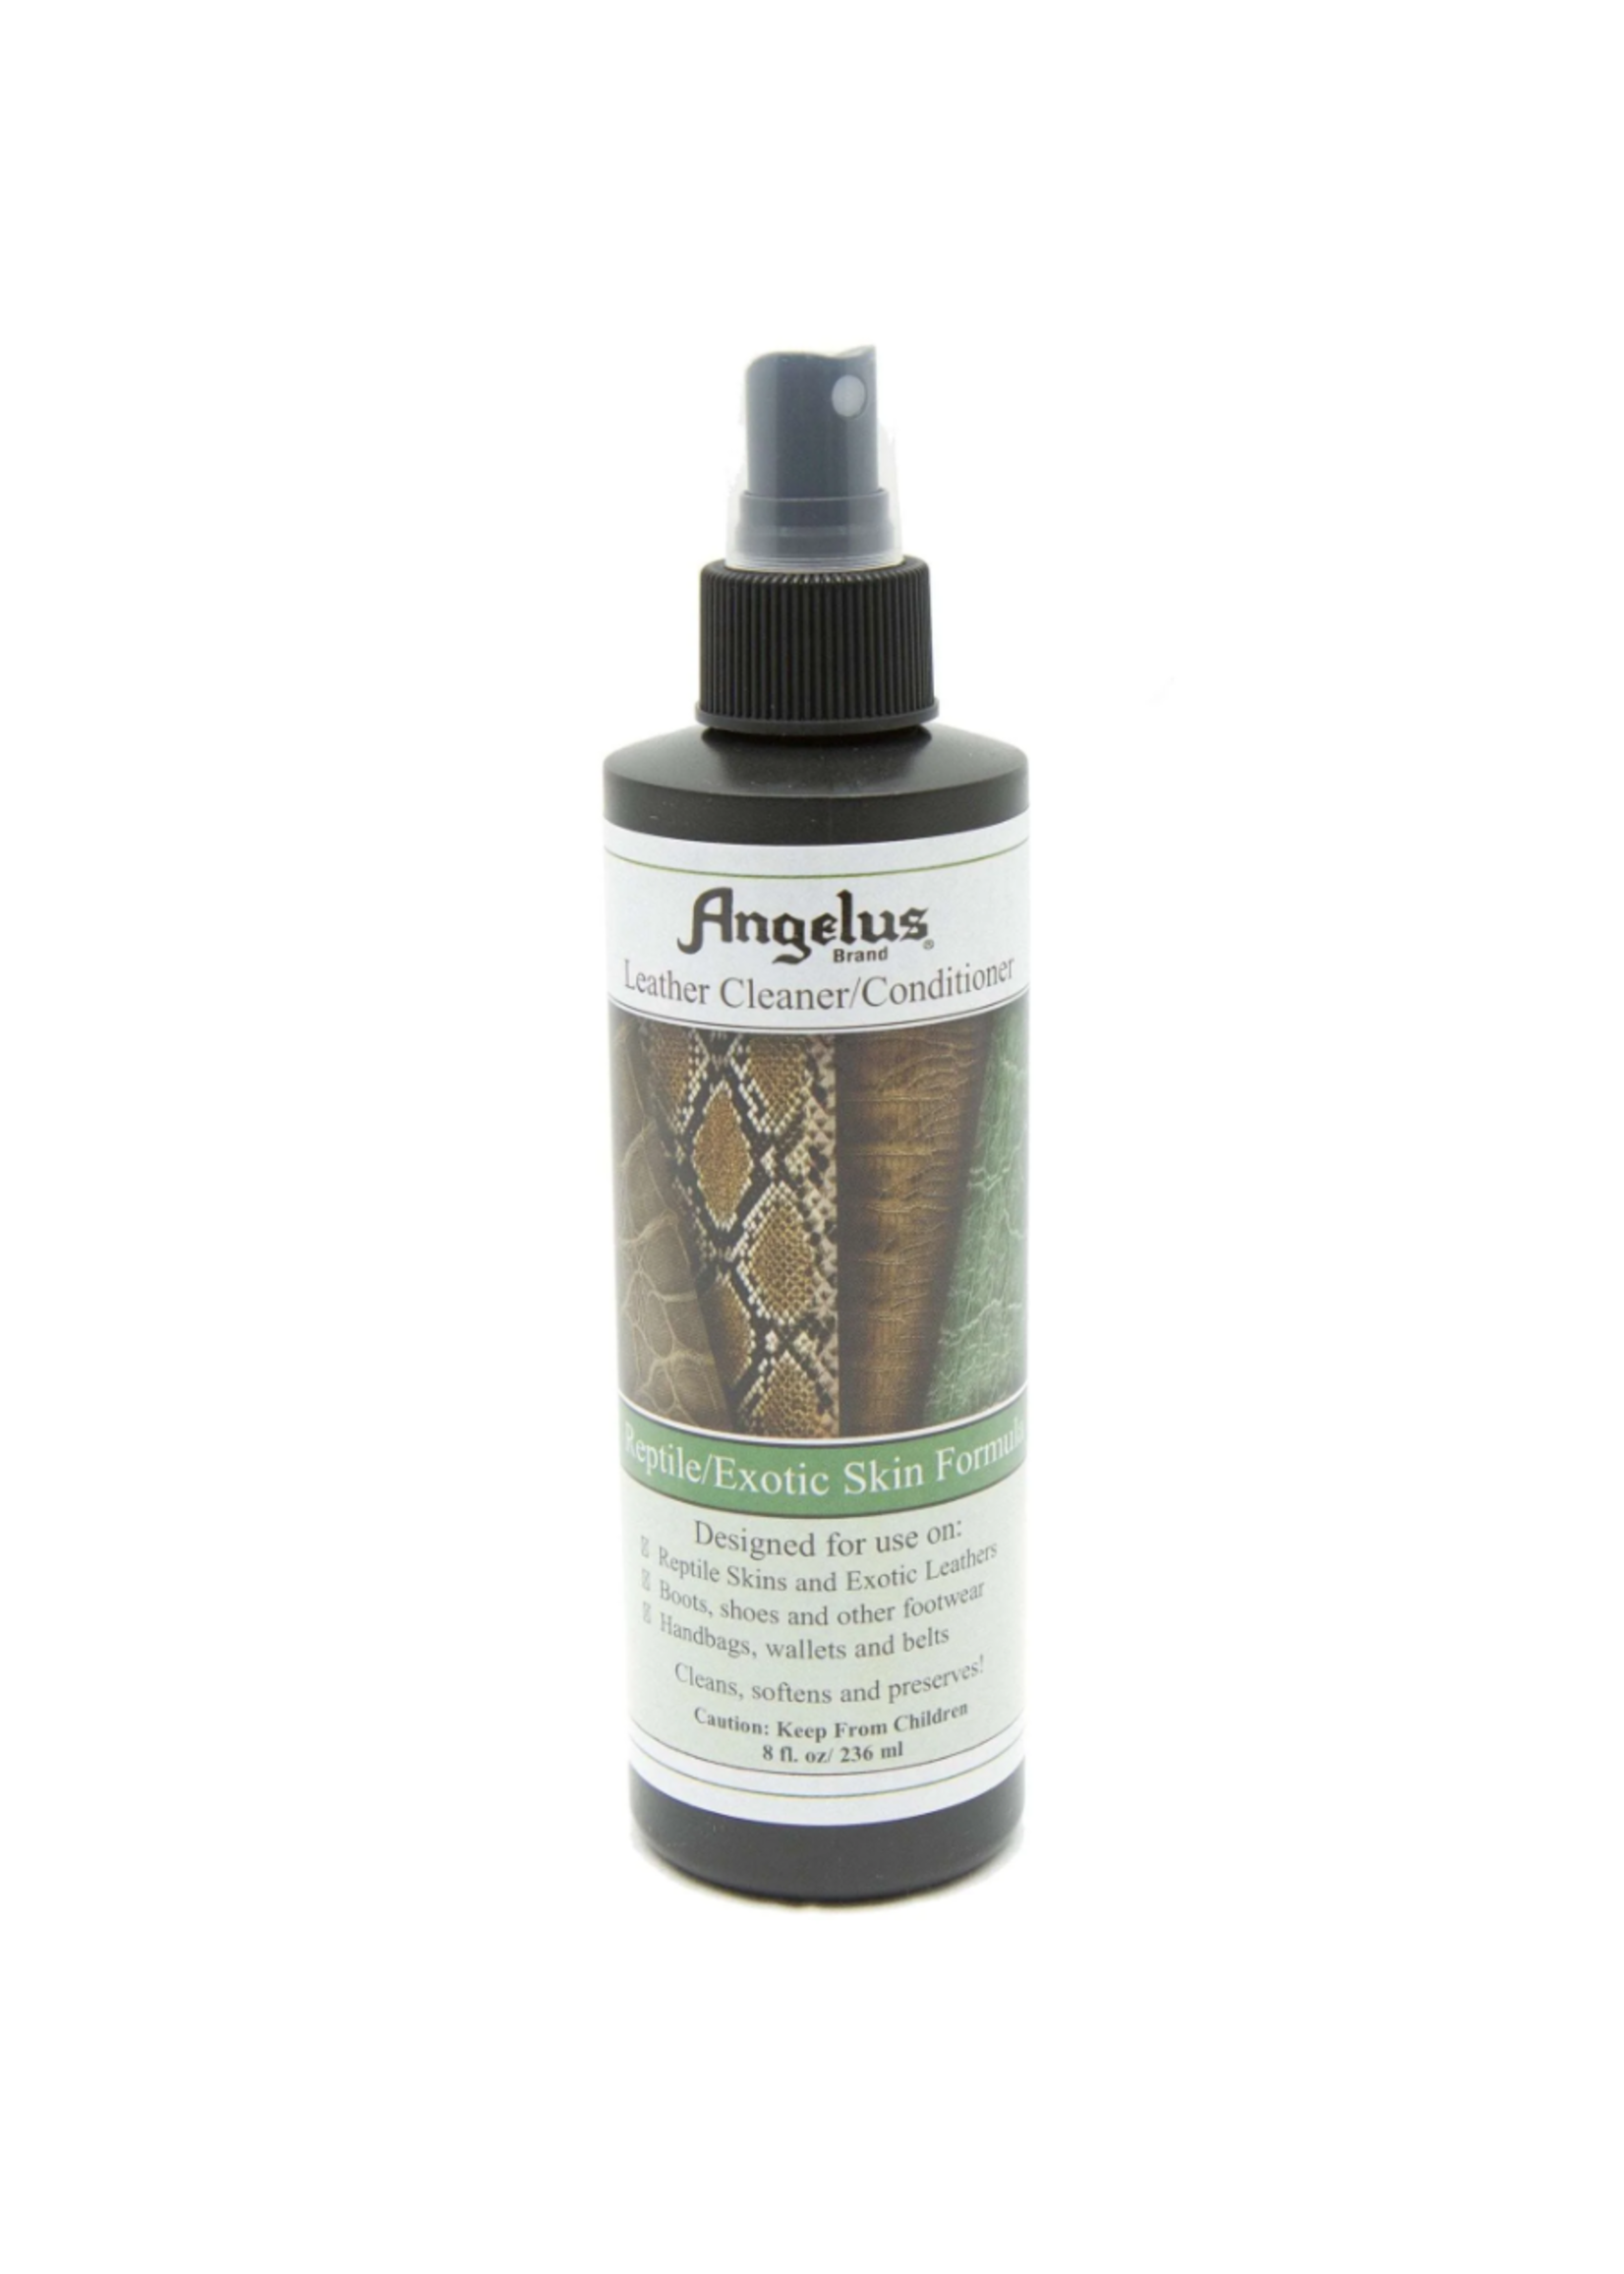 Angelus Direct Leather Cleaner/Conditioner Reptile/Exotic Skin Formula